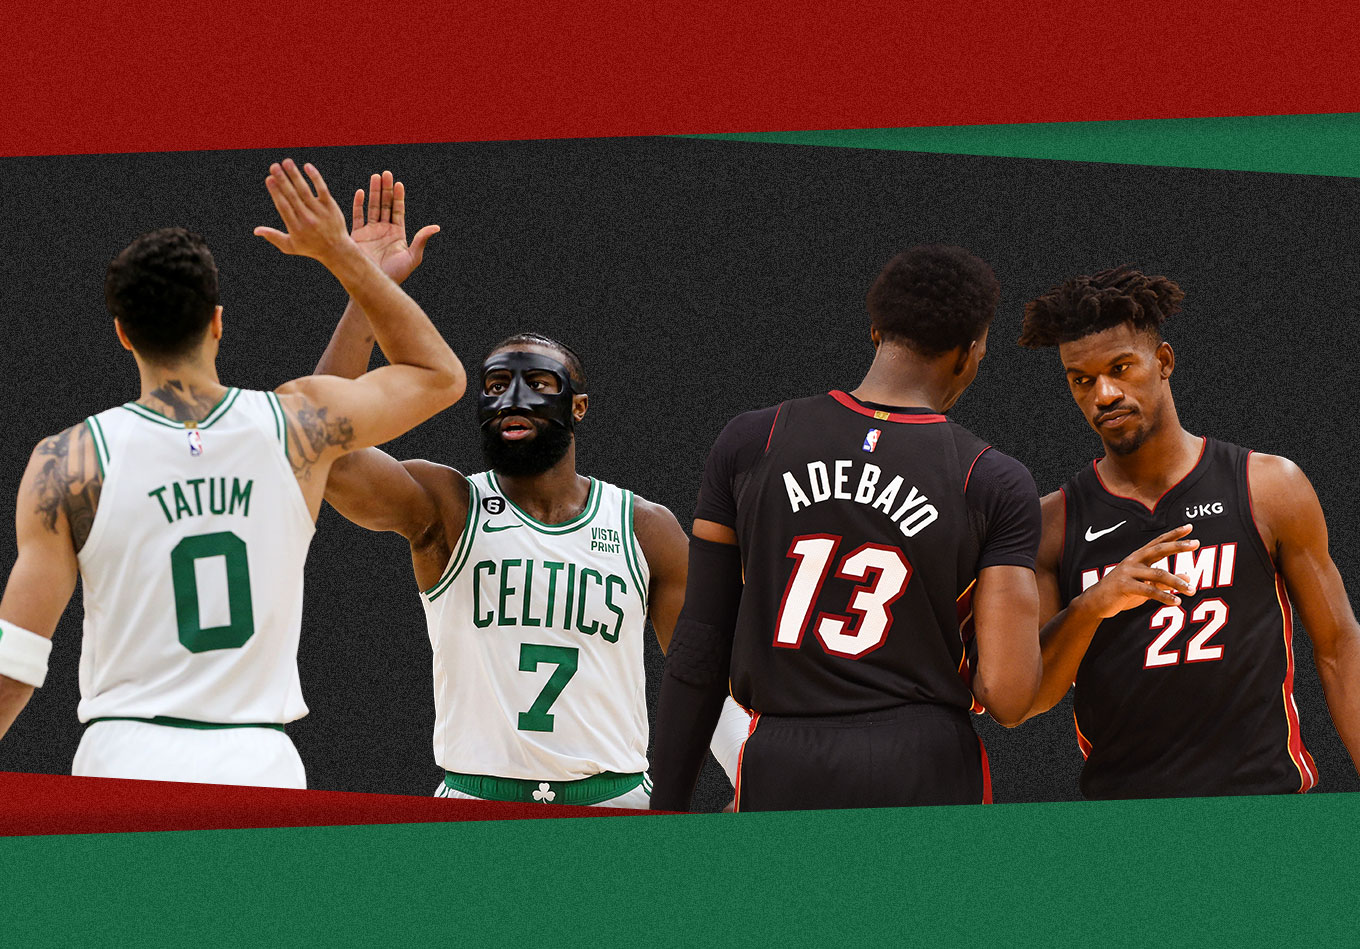 Celtics vs Heat Prediction and Five Storylines to Watch